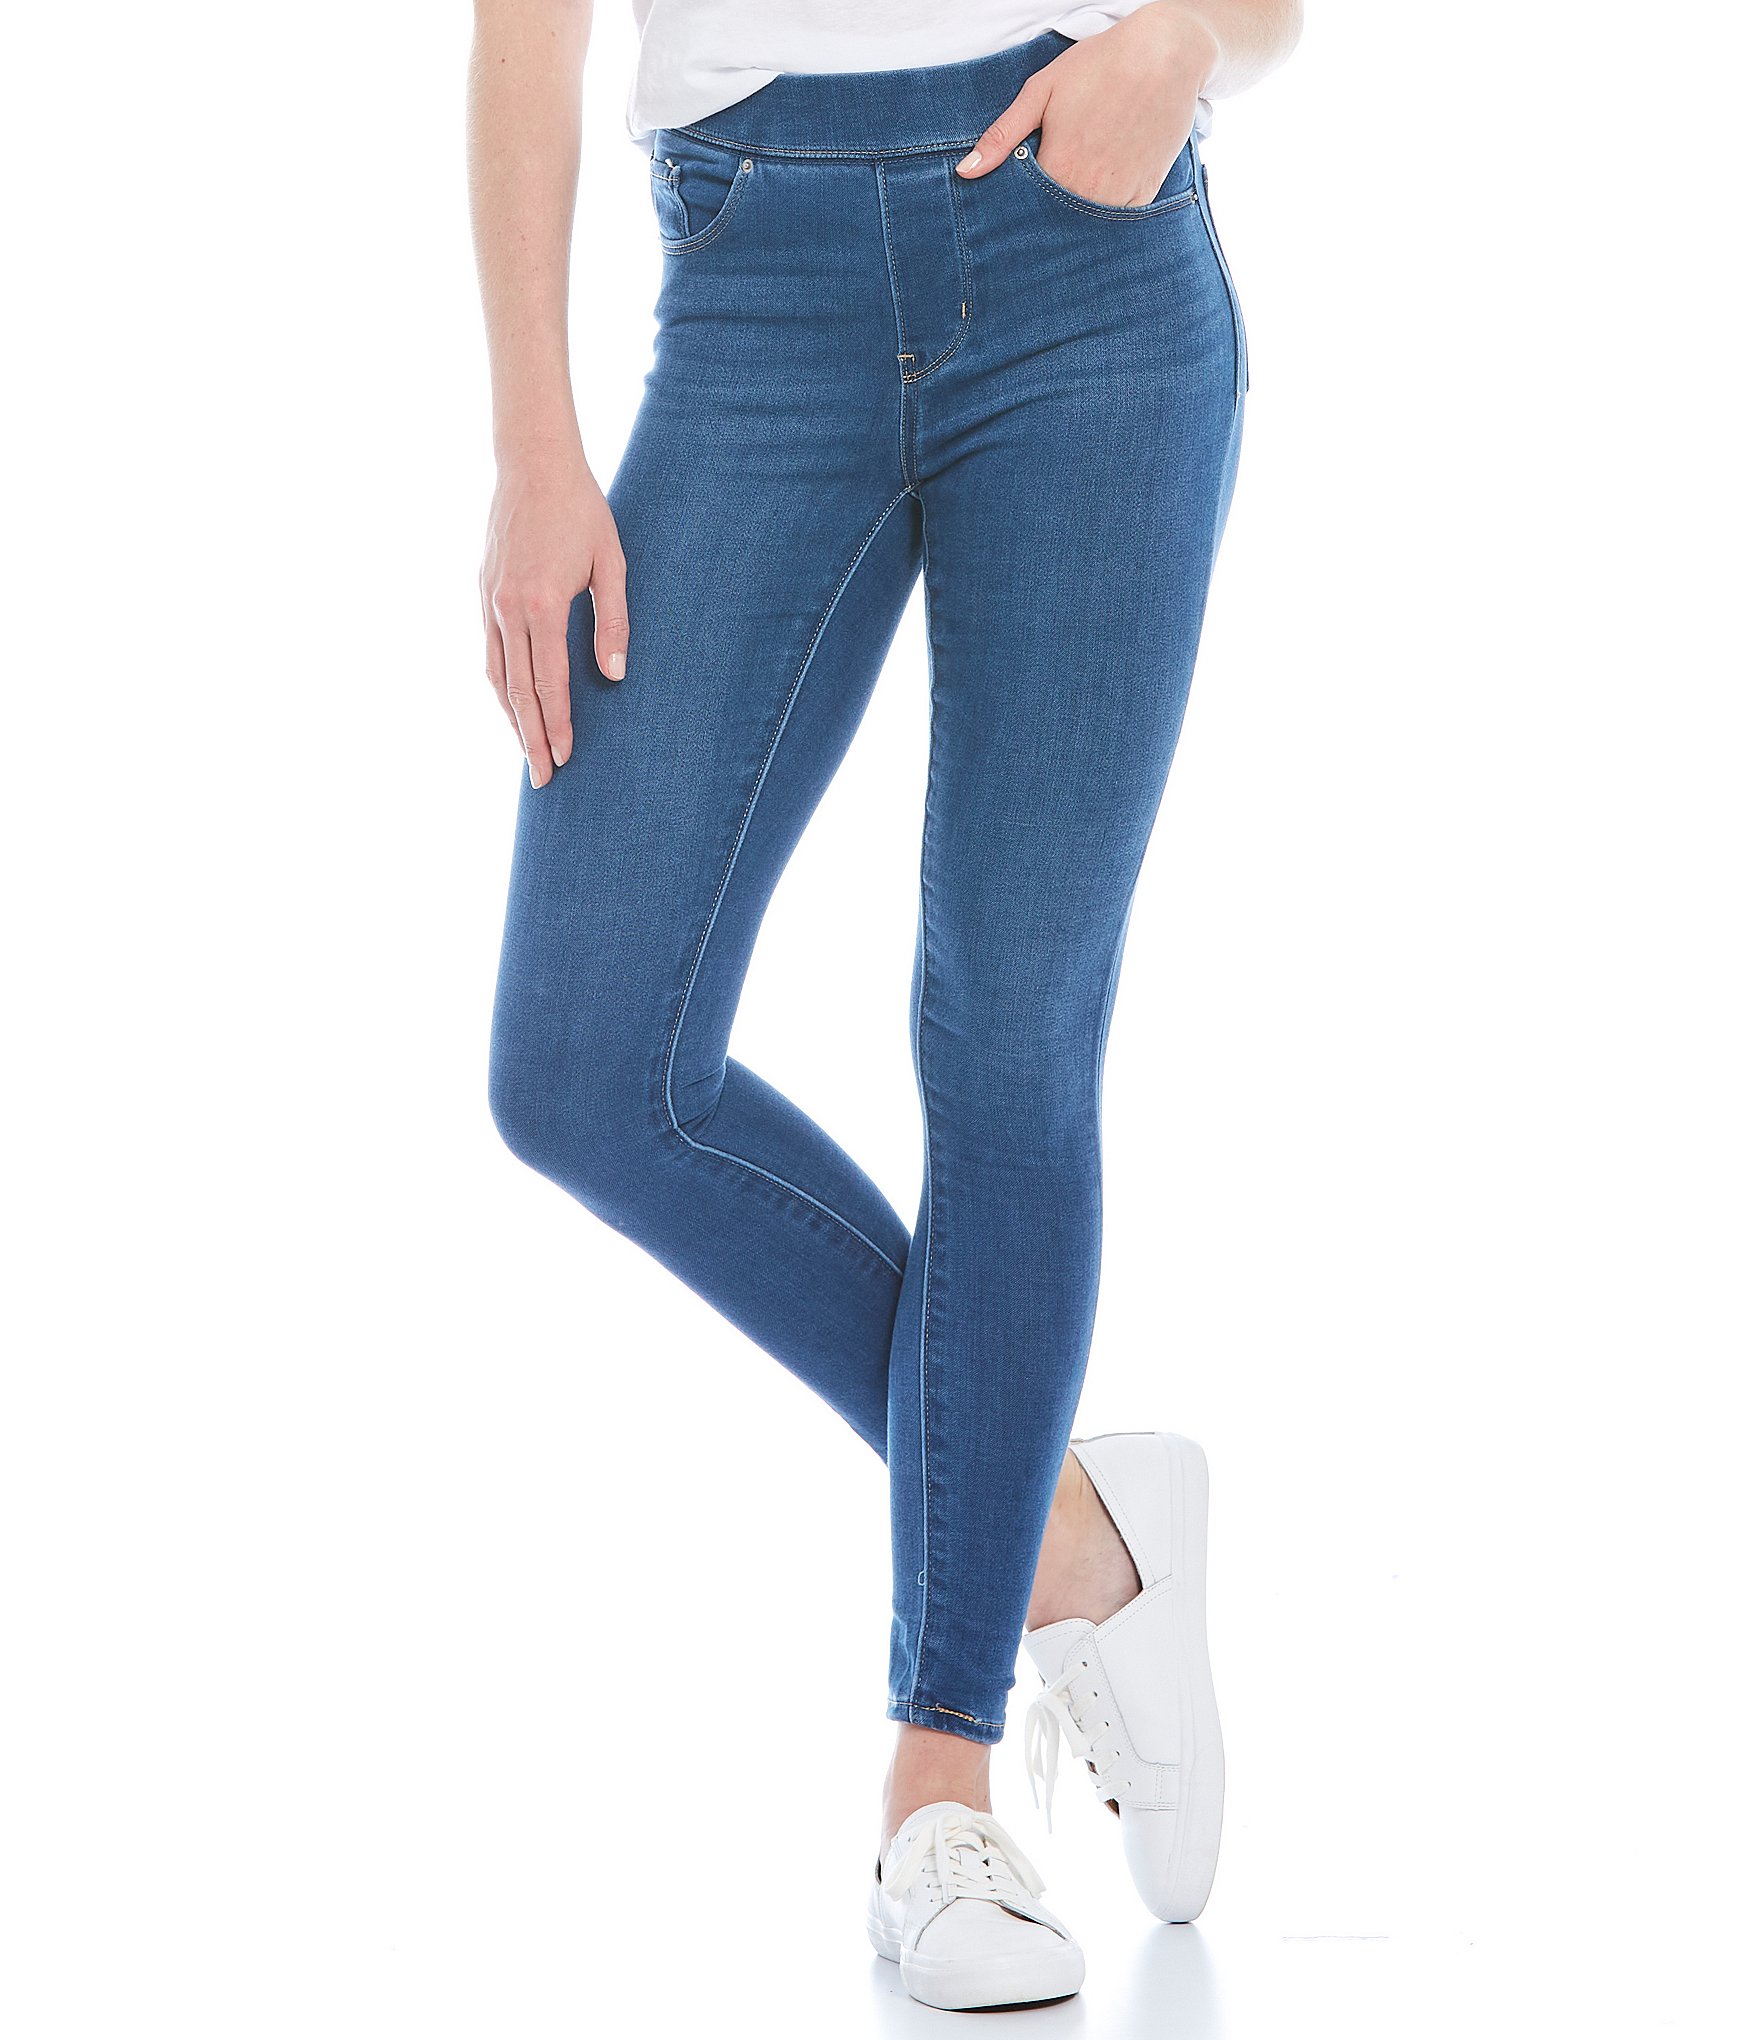 Wearing Jeggings for Your Body Shape!